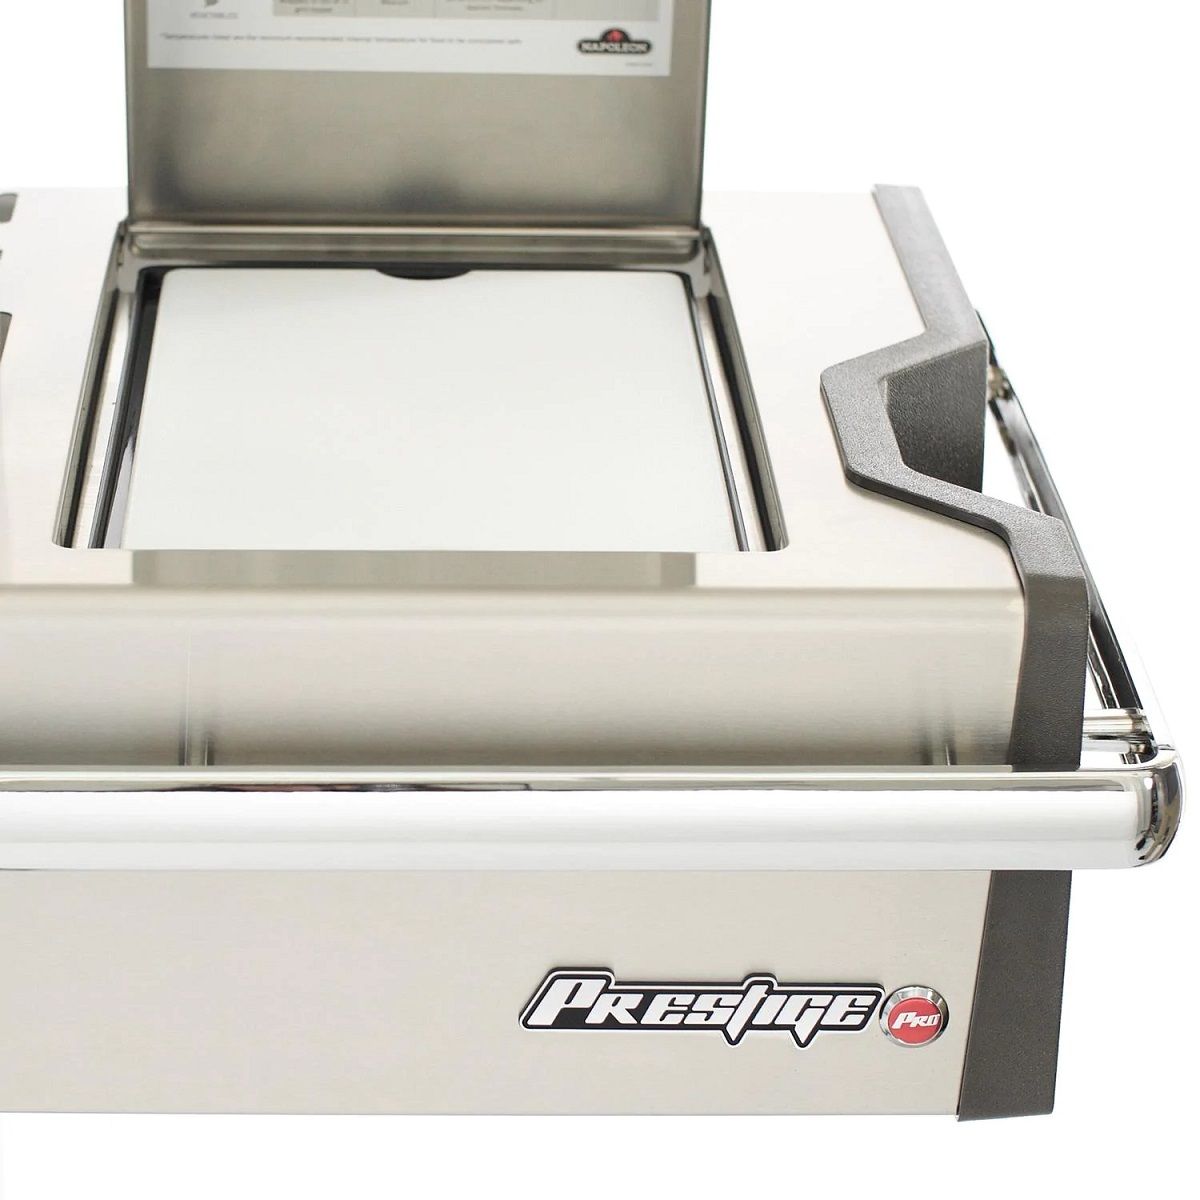 Napoleon Prestige PRO 665 Natural Gas Grill with Infrared Rear Burner and Infrared Side Burner and Rotisserie Kit - PRO665RSIBNSS-3